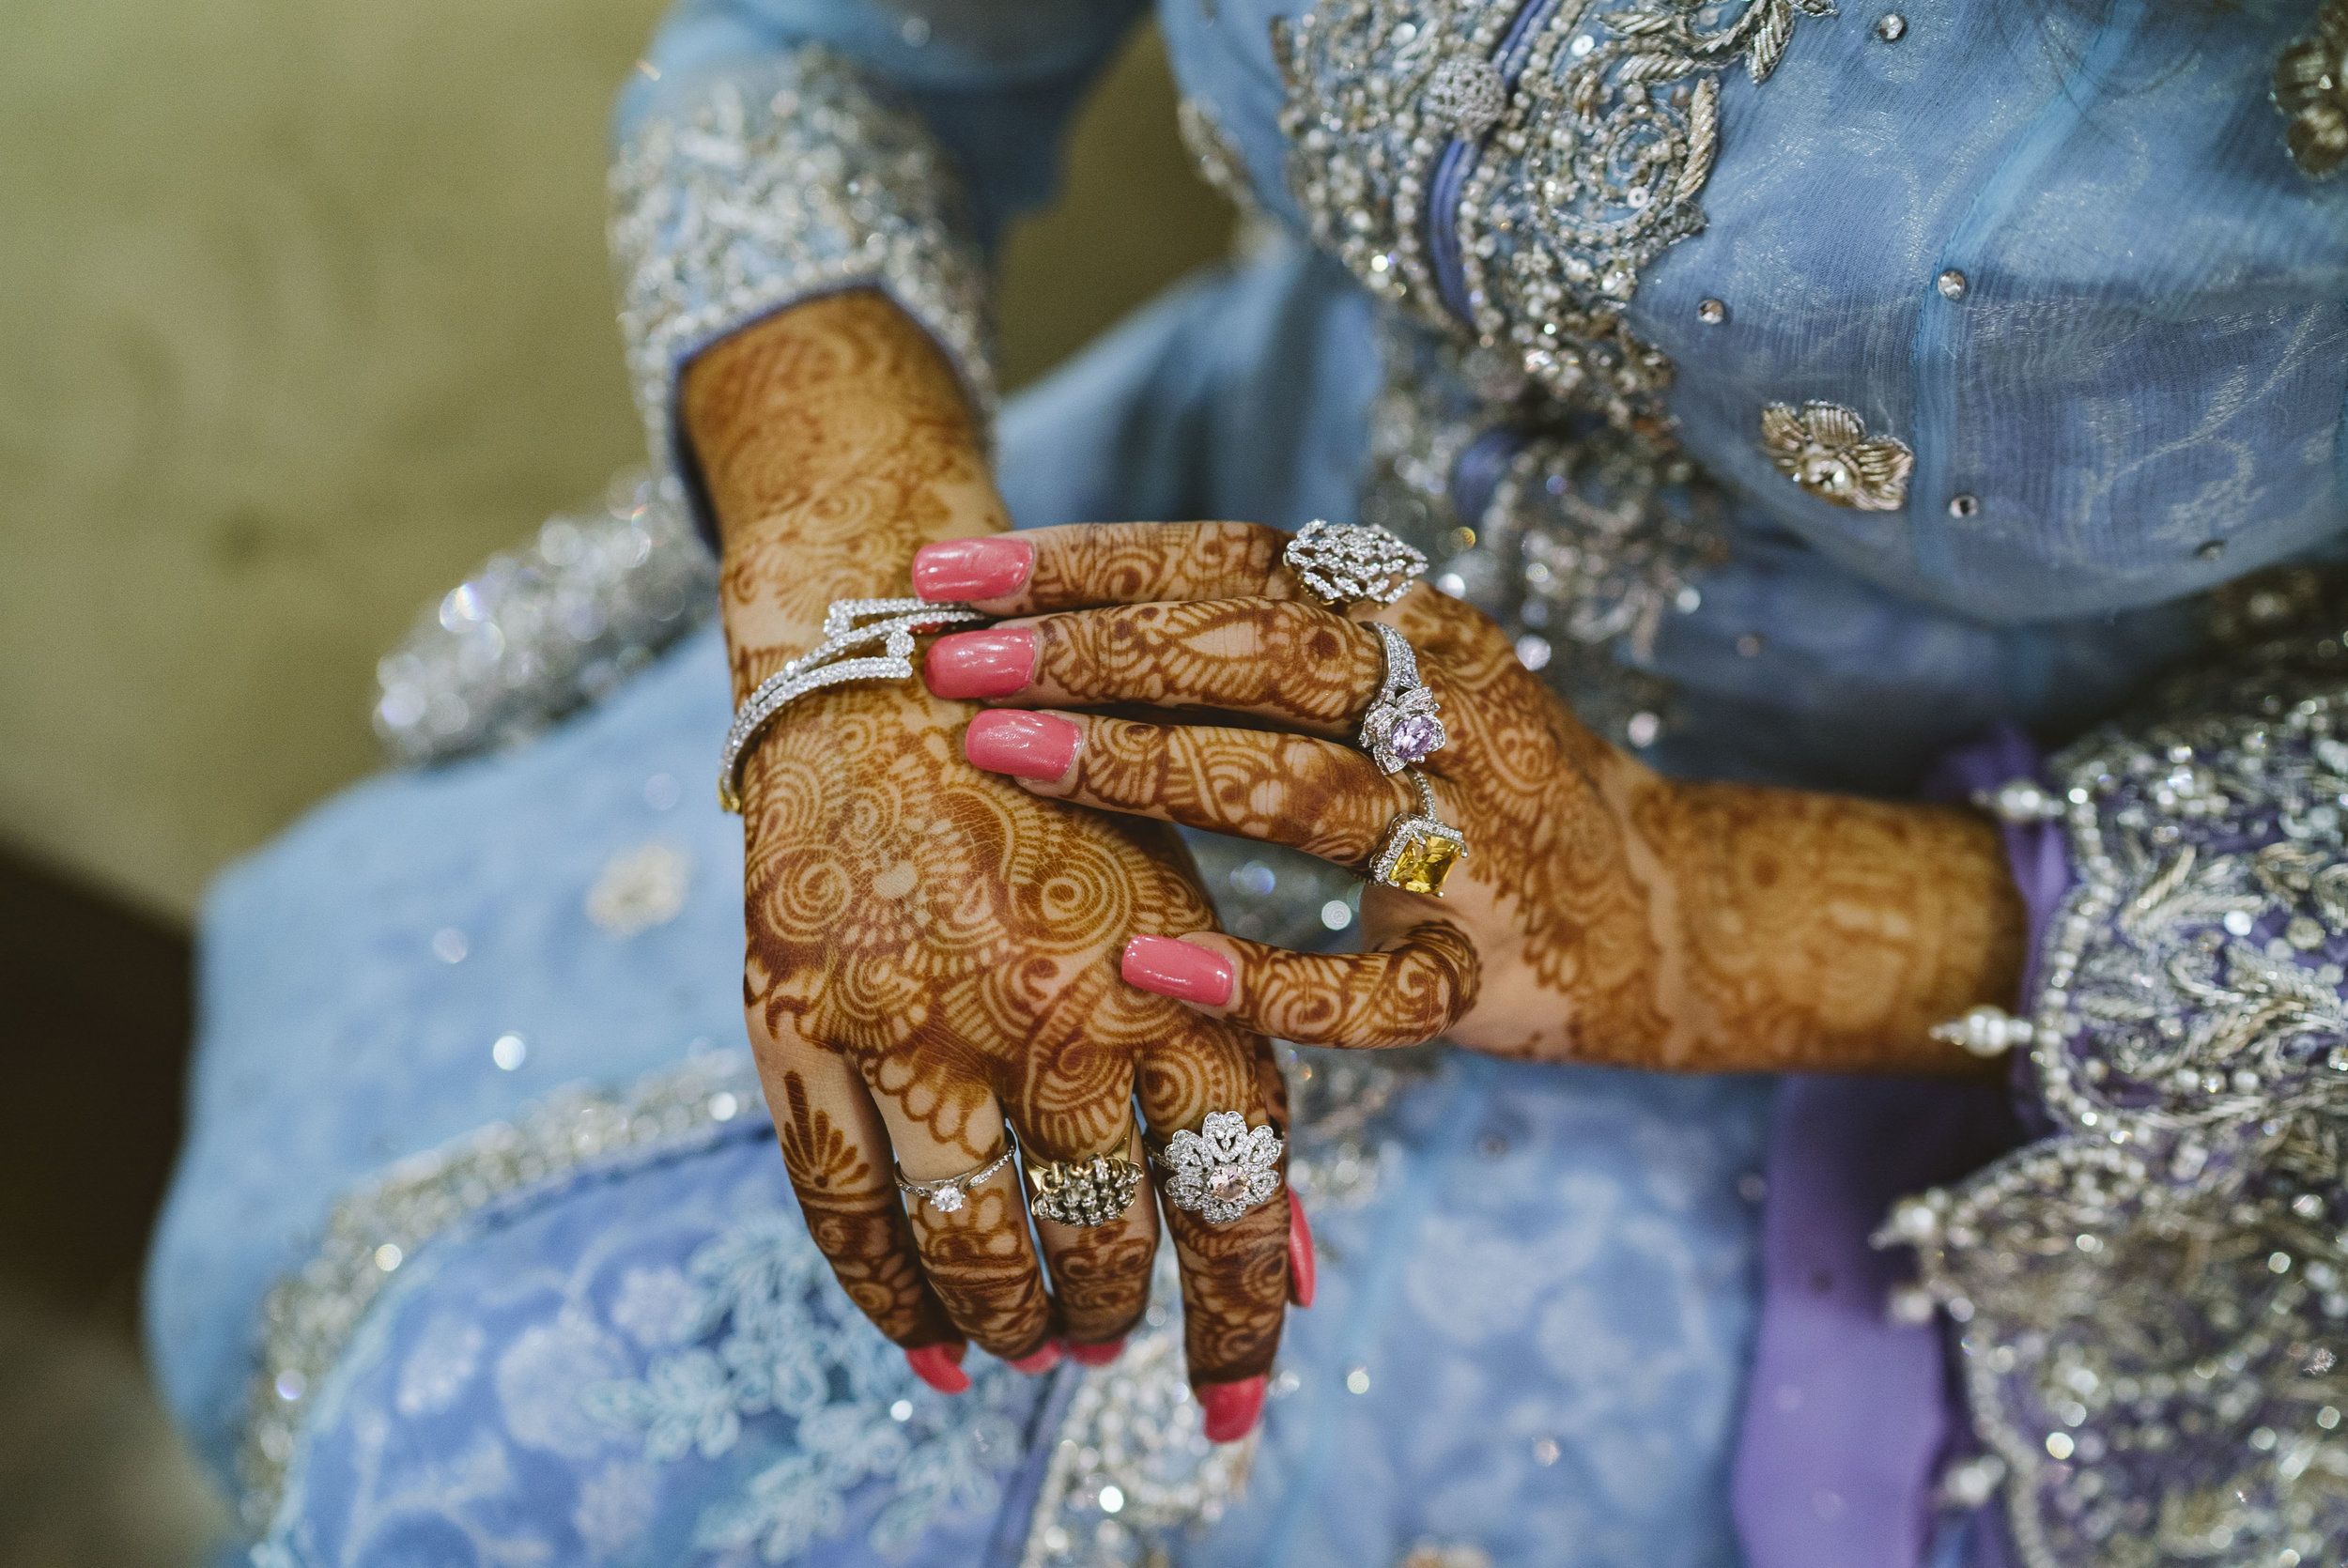  Newlywed Ayesha Sadal adjusts her jewelry before heading to the  walima  for Sadaf and Kashif Malik. The  walima  is a wedding tradition in which the groom's side provides a large feast to the bride's family and other guests. Beforehand, on the day 